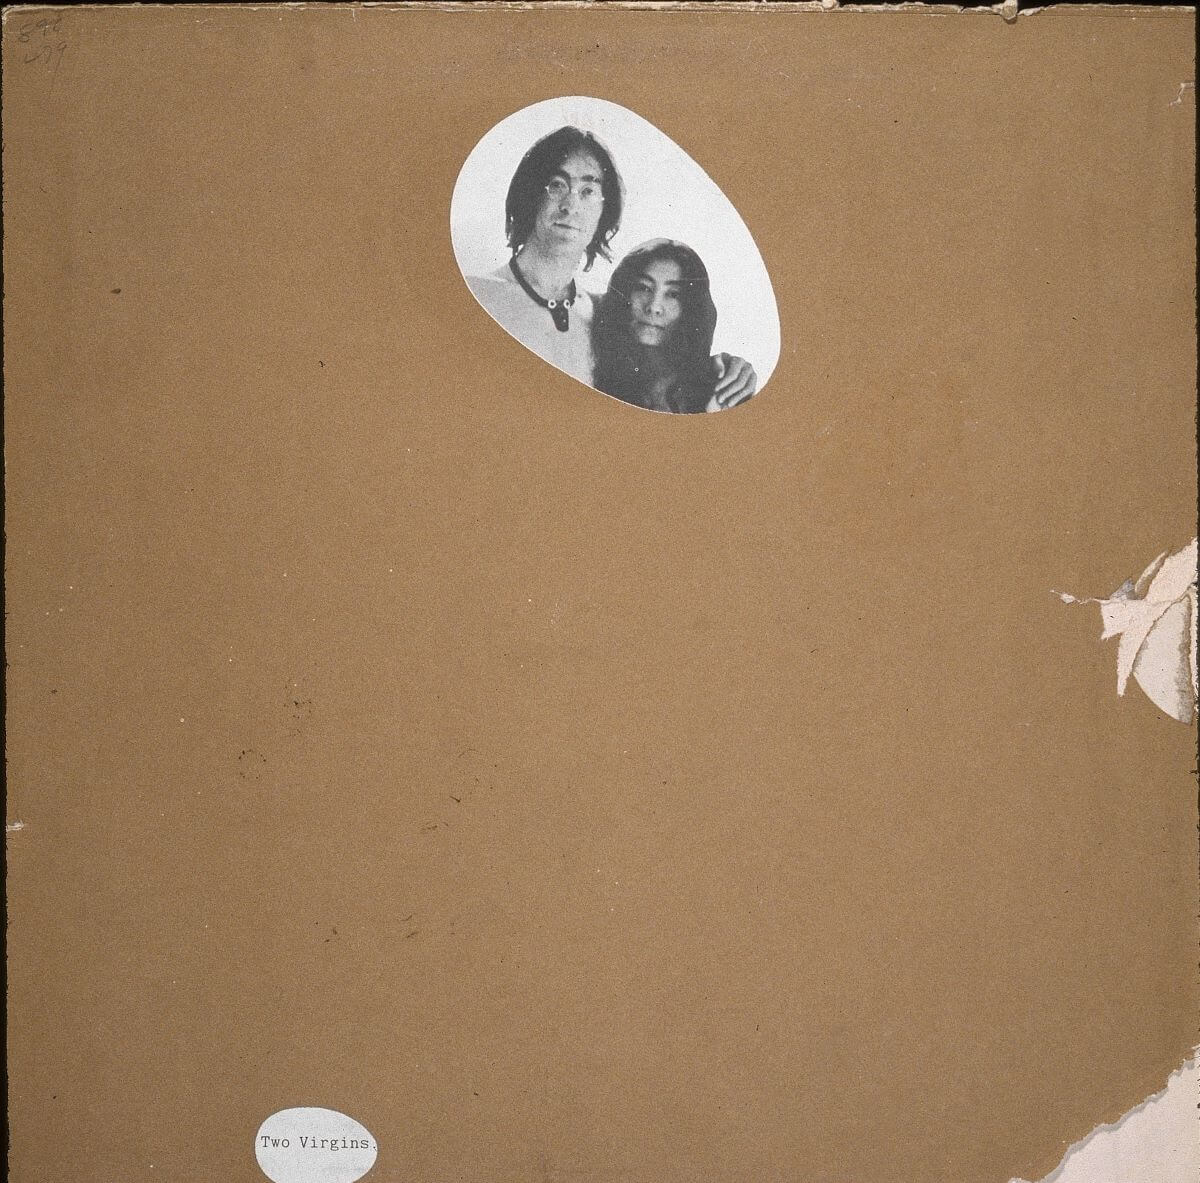 John Lennon and Yoko Ono's face peek out from a circle of the otherwise hidden album cover for 'Two Virgins.' There is brown paper over it.